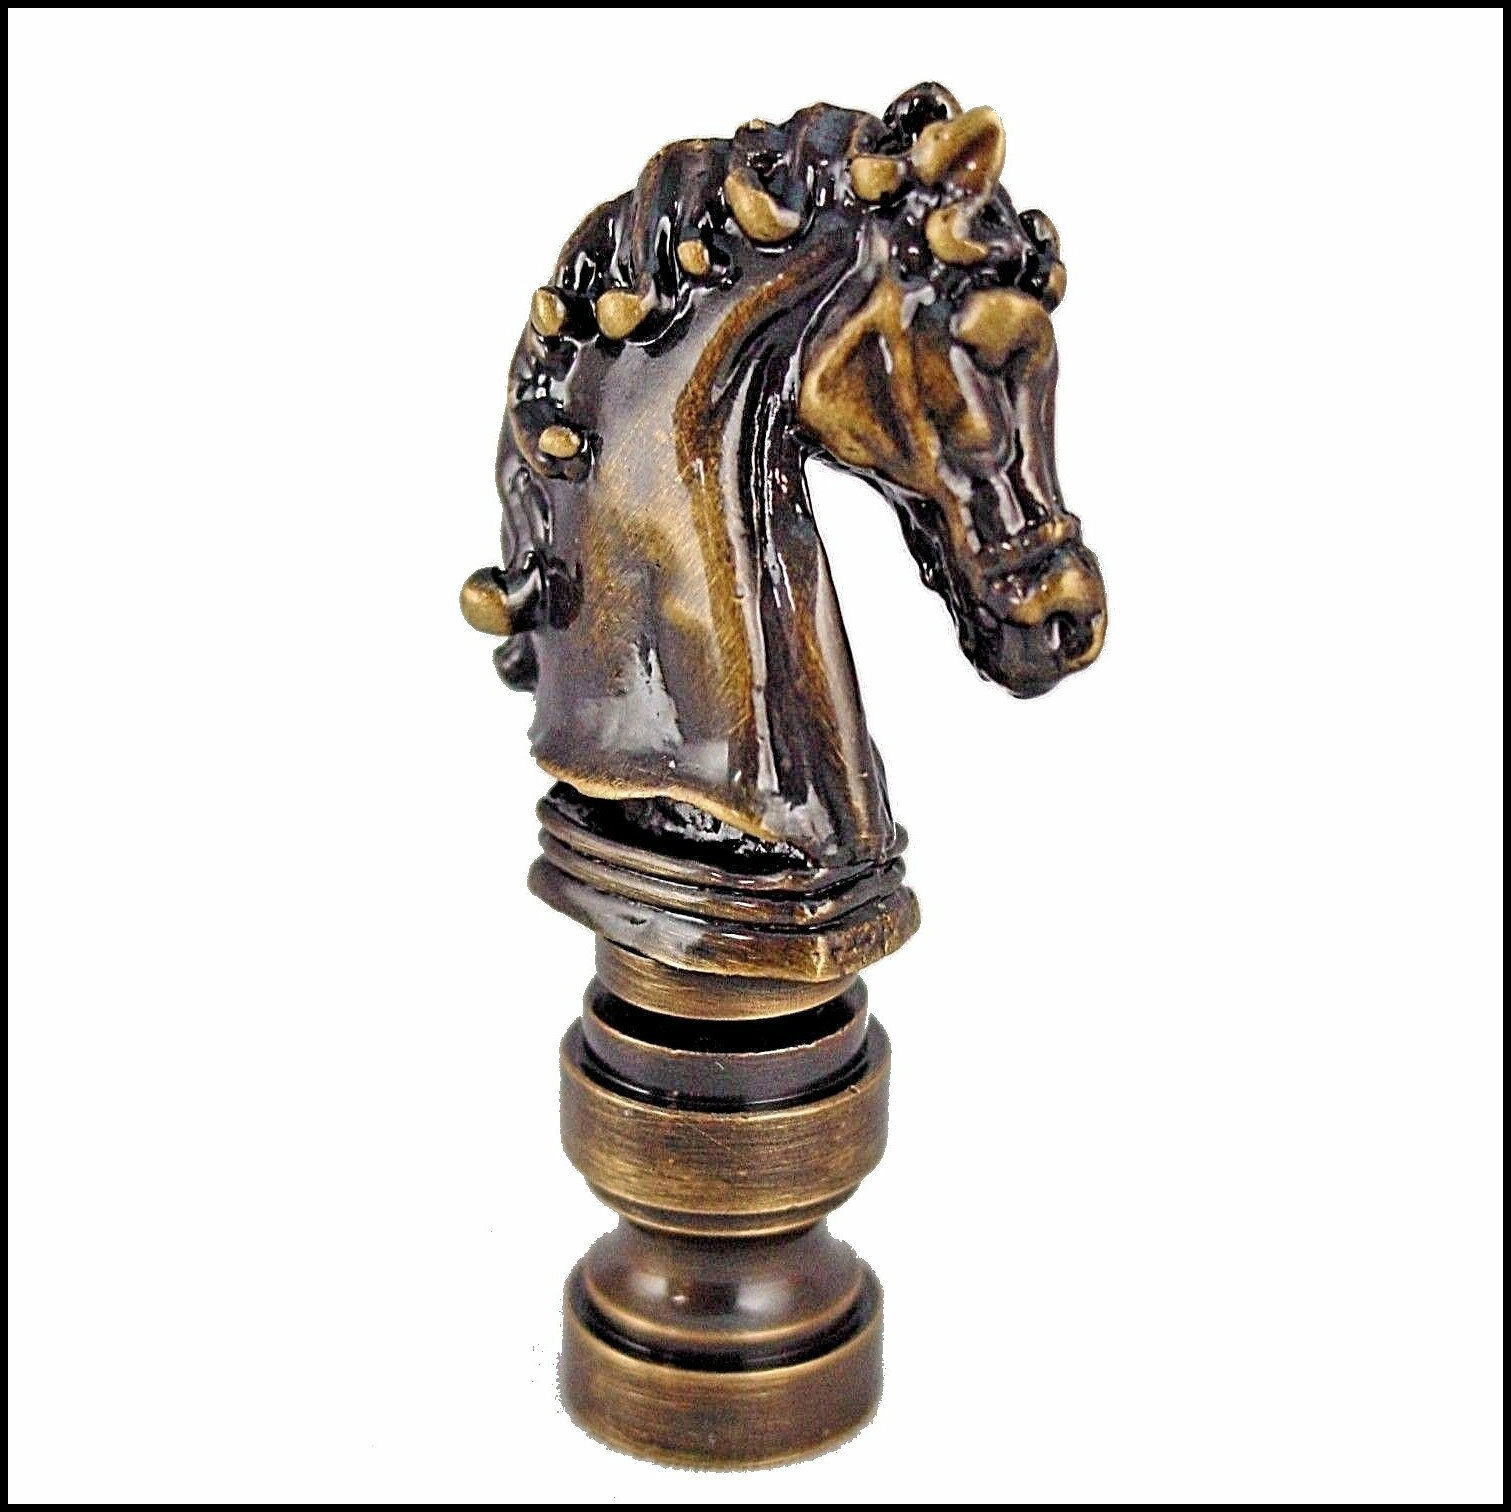 ANTIQUE  BRASS  HORSE  HEAD  ELECTRIC  LIGHTING  LAMP  SHADE  FINIAL    (NEW)